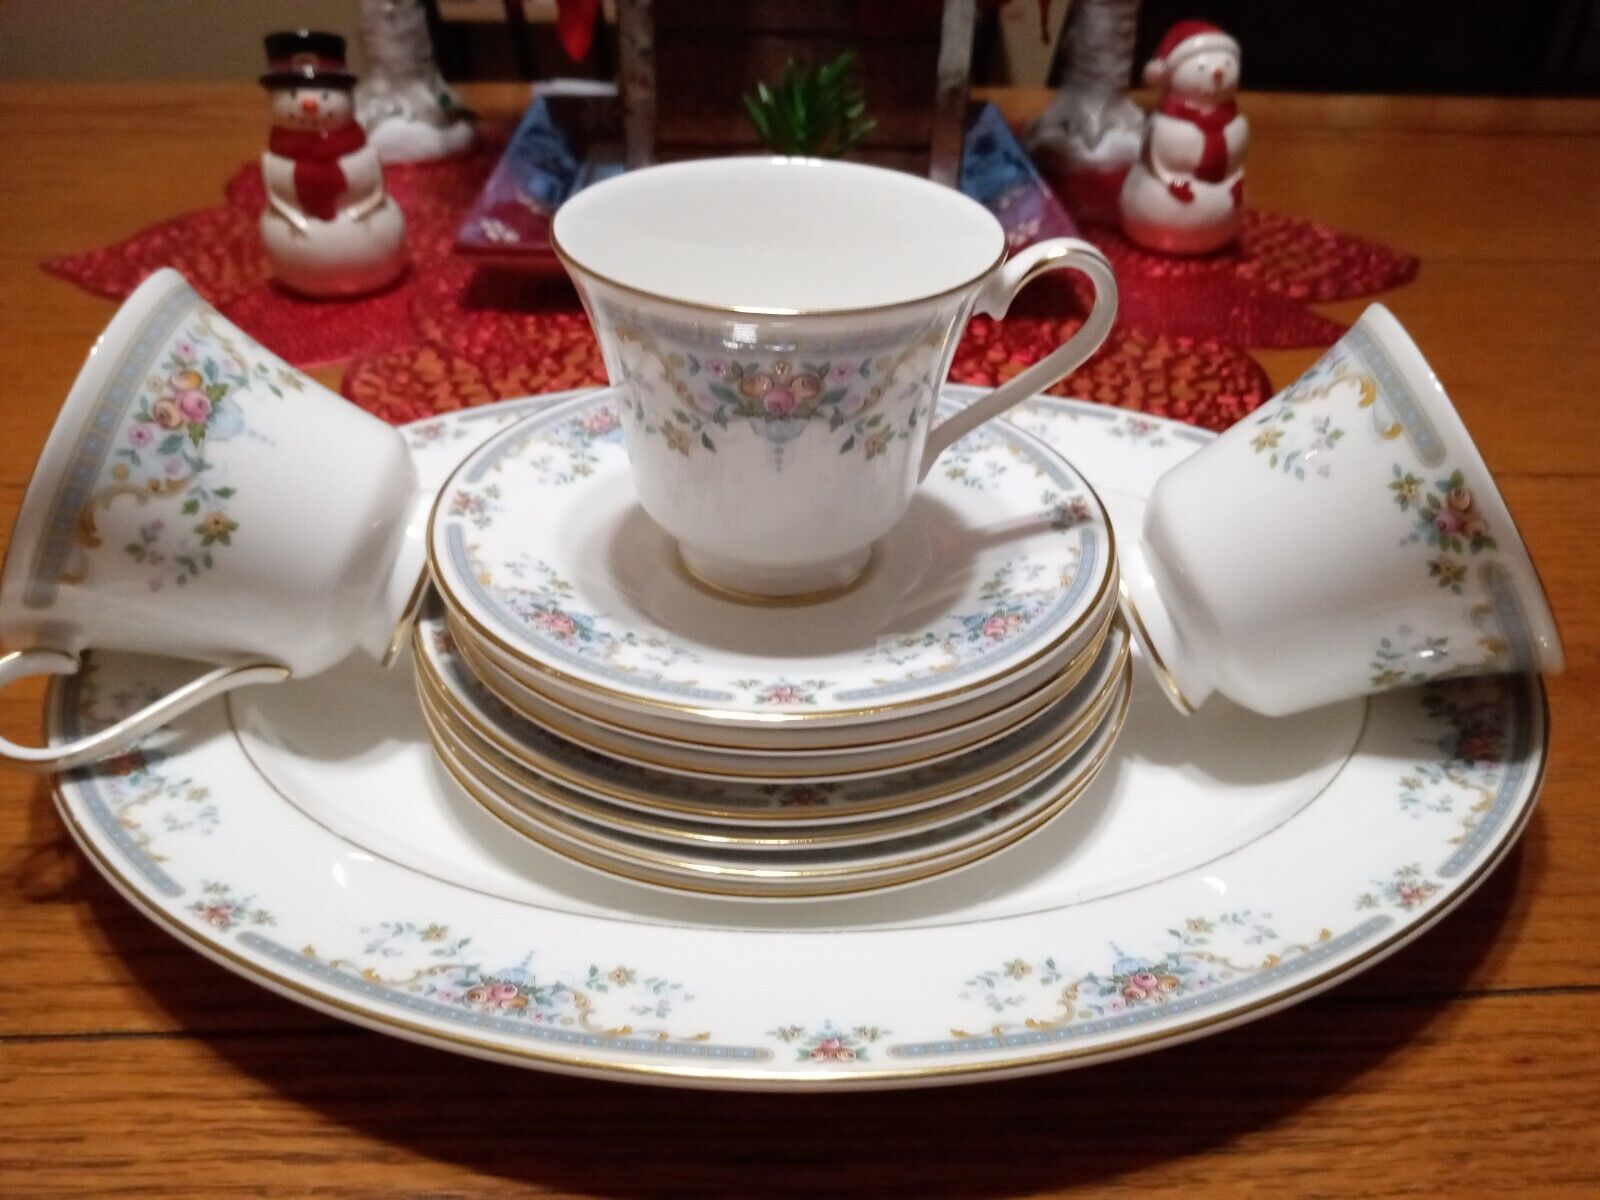 Royal Doulton Vail Tea cups,saucers,Desert plates and Platter. Discontinued HTF.